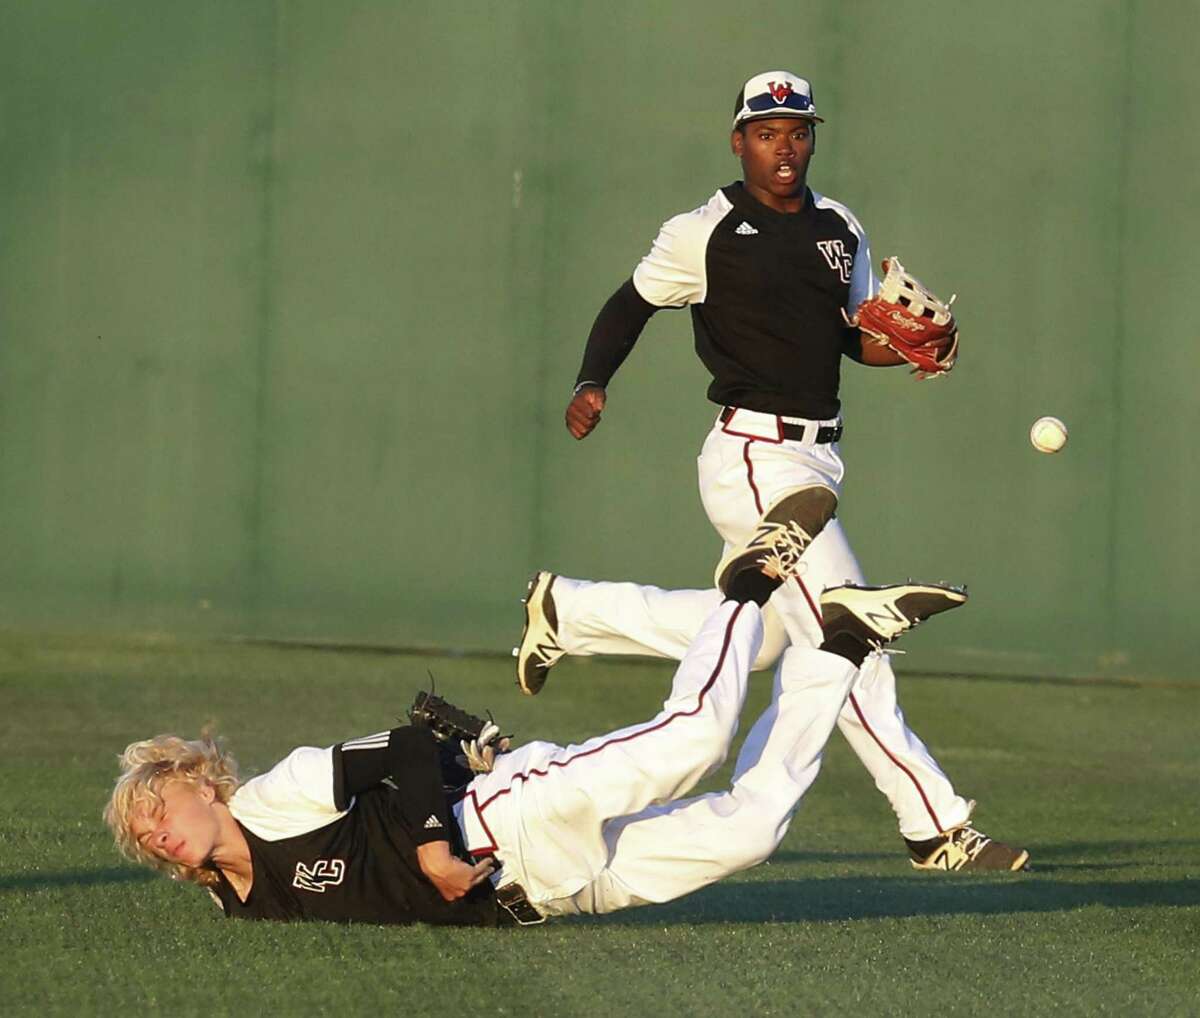 Churchill right fielder Hudson Head dives but misses a diving catch in the fourth inning as teammate Jordan Billups backs him up on the play against Clemens at Blossom Athletic Center on May 12, 2017.